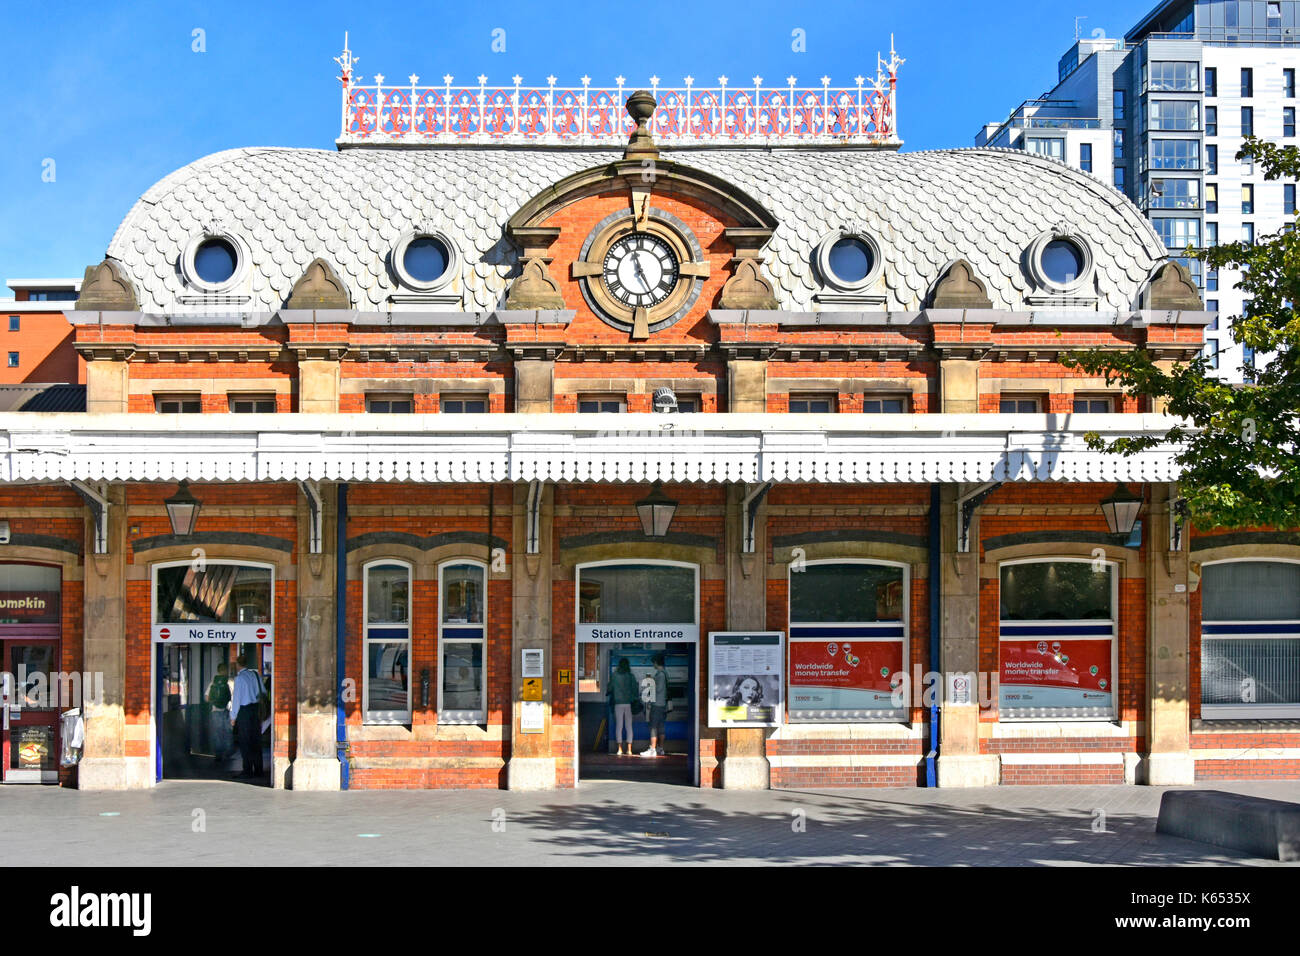 Slough town railway station & entrance showing the unusual Victorian scalloped roof tiles & decorative ironwork around the top of the building Stock Photo